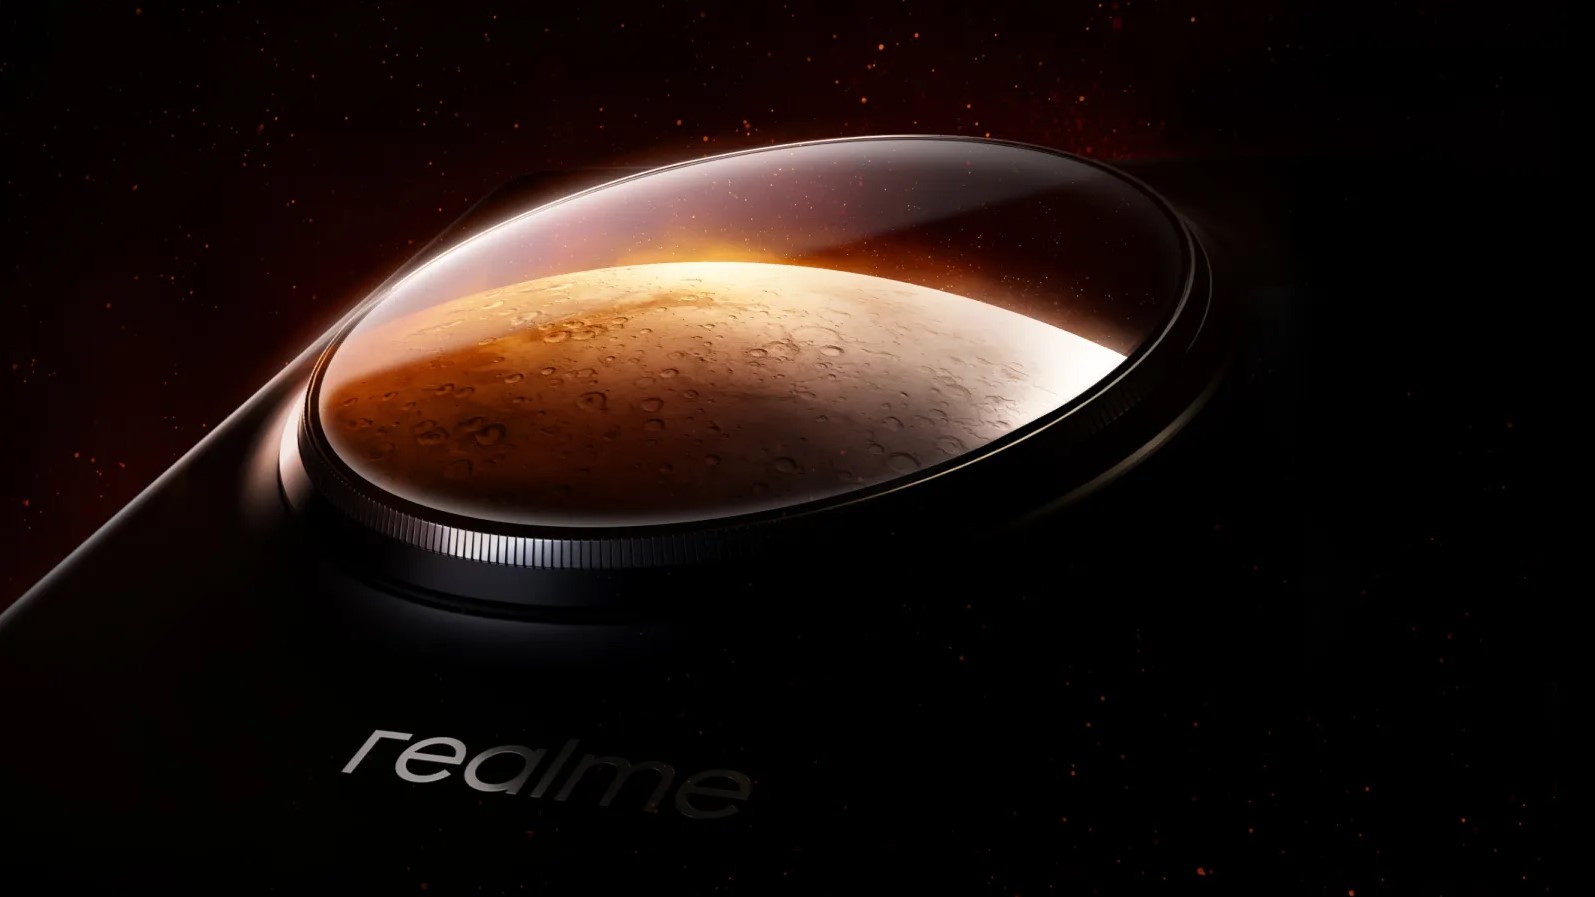 Realme GT5 - New Teasers Confirm the LED Lights on The Back And More